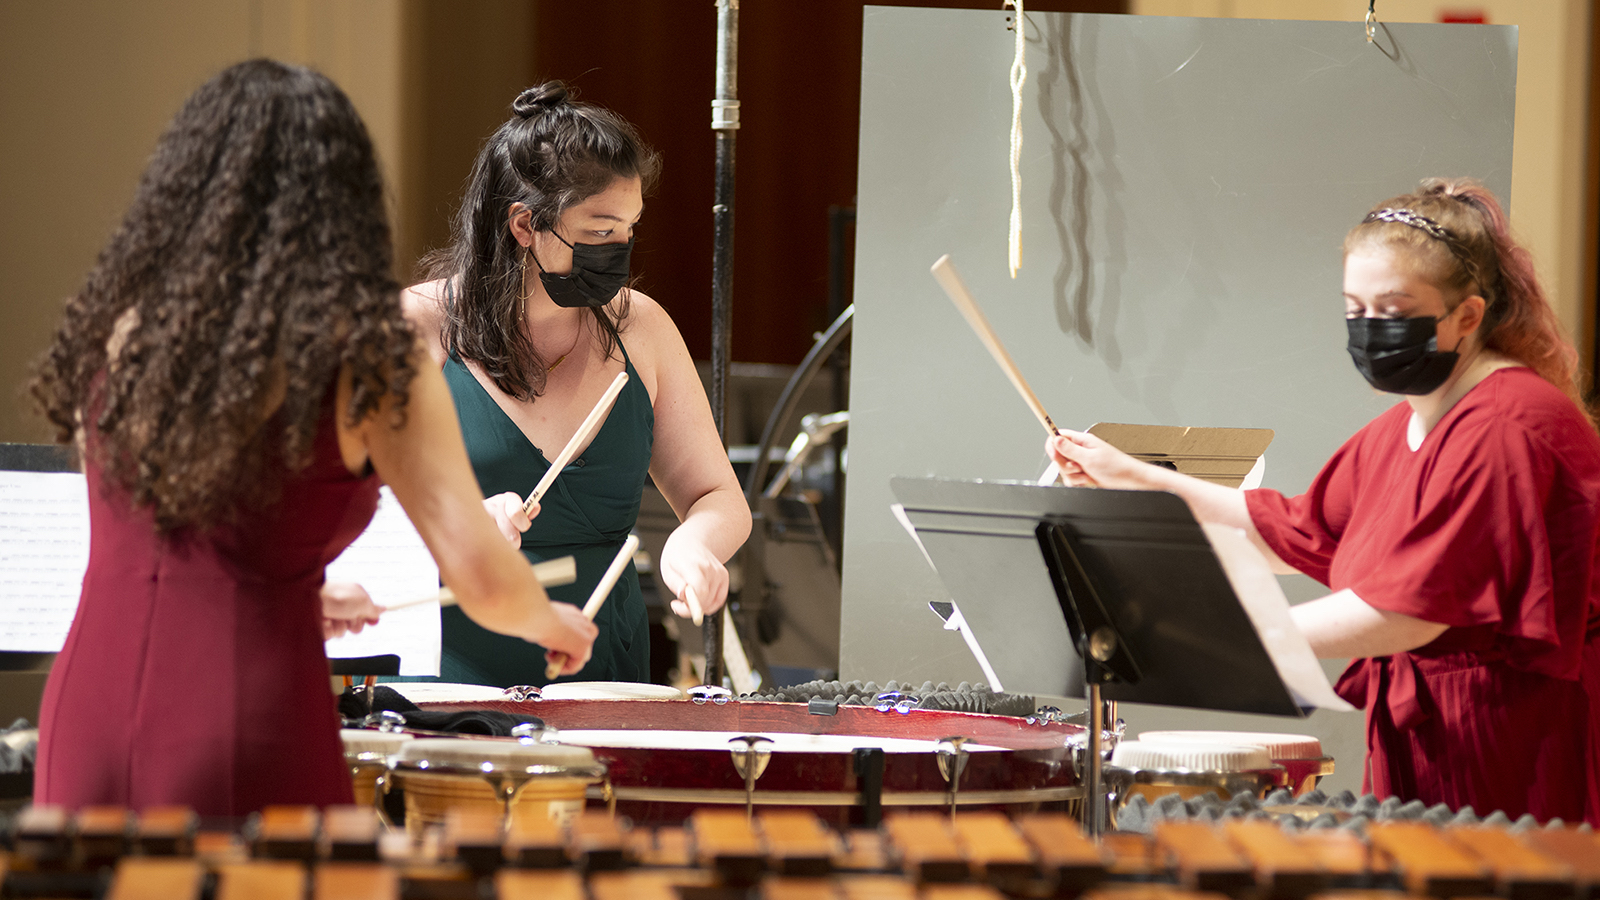  Three women percussion students playing together while wearing face masks.